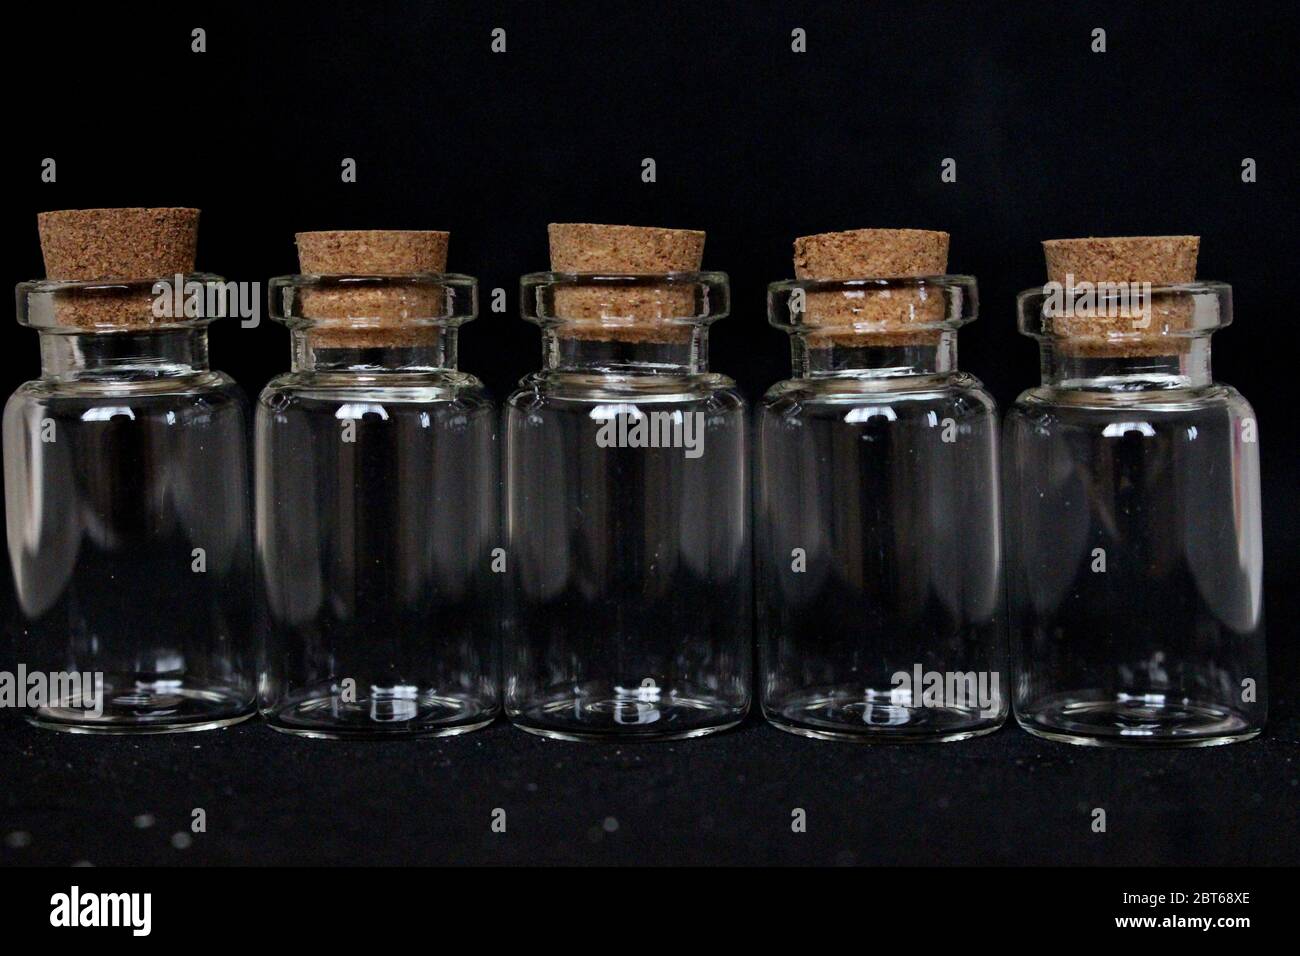 A close up photograph of five empty glass bottles with cork stoppers, against a black background Stock Photo